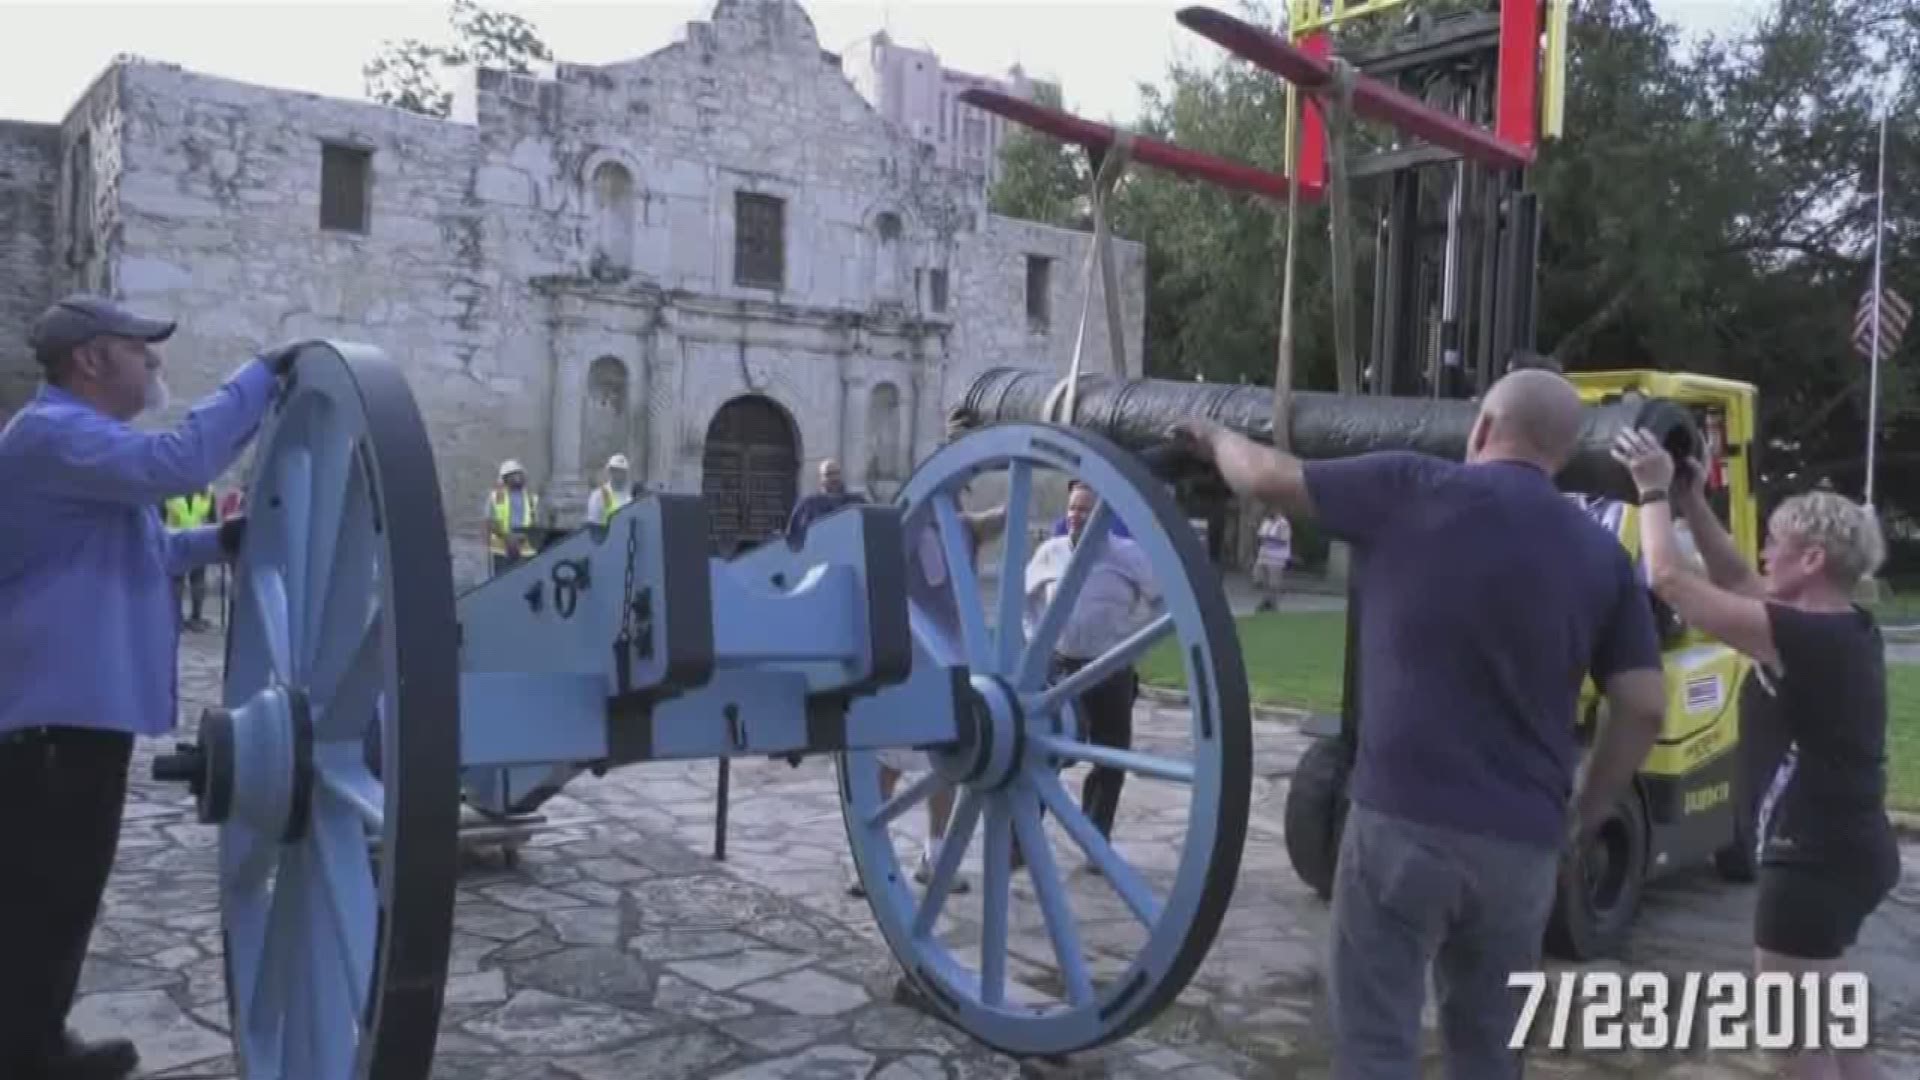 The famous 16-pound cannon used in The Battle of the Alamo is restored and is now in front of the Alamo. Associate Curator, Ernesto Rodriguez, shares more.